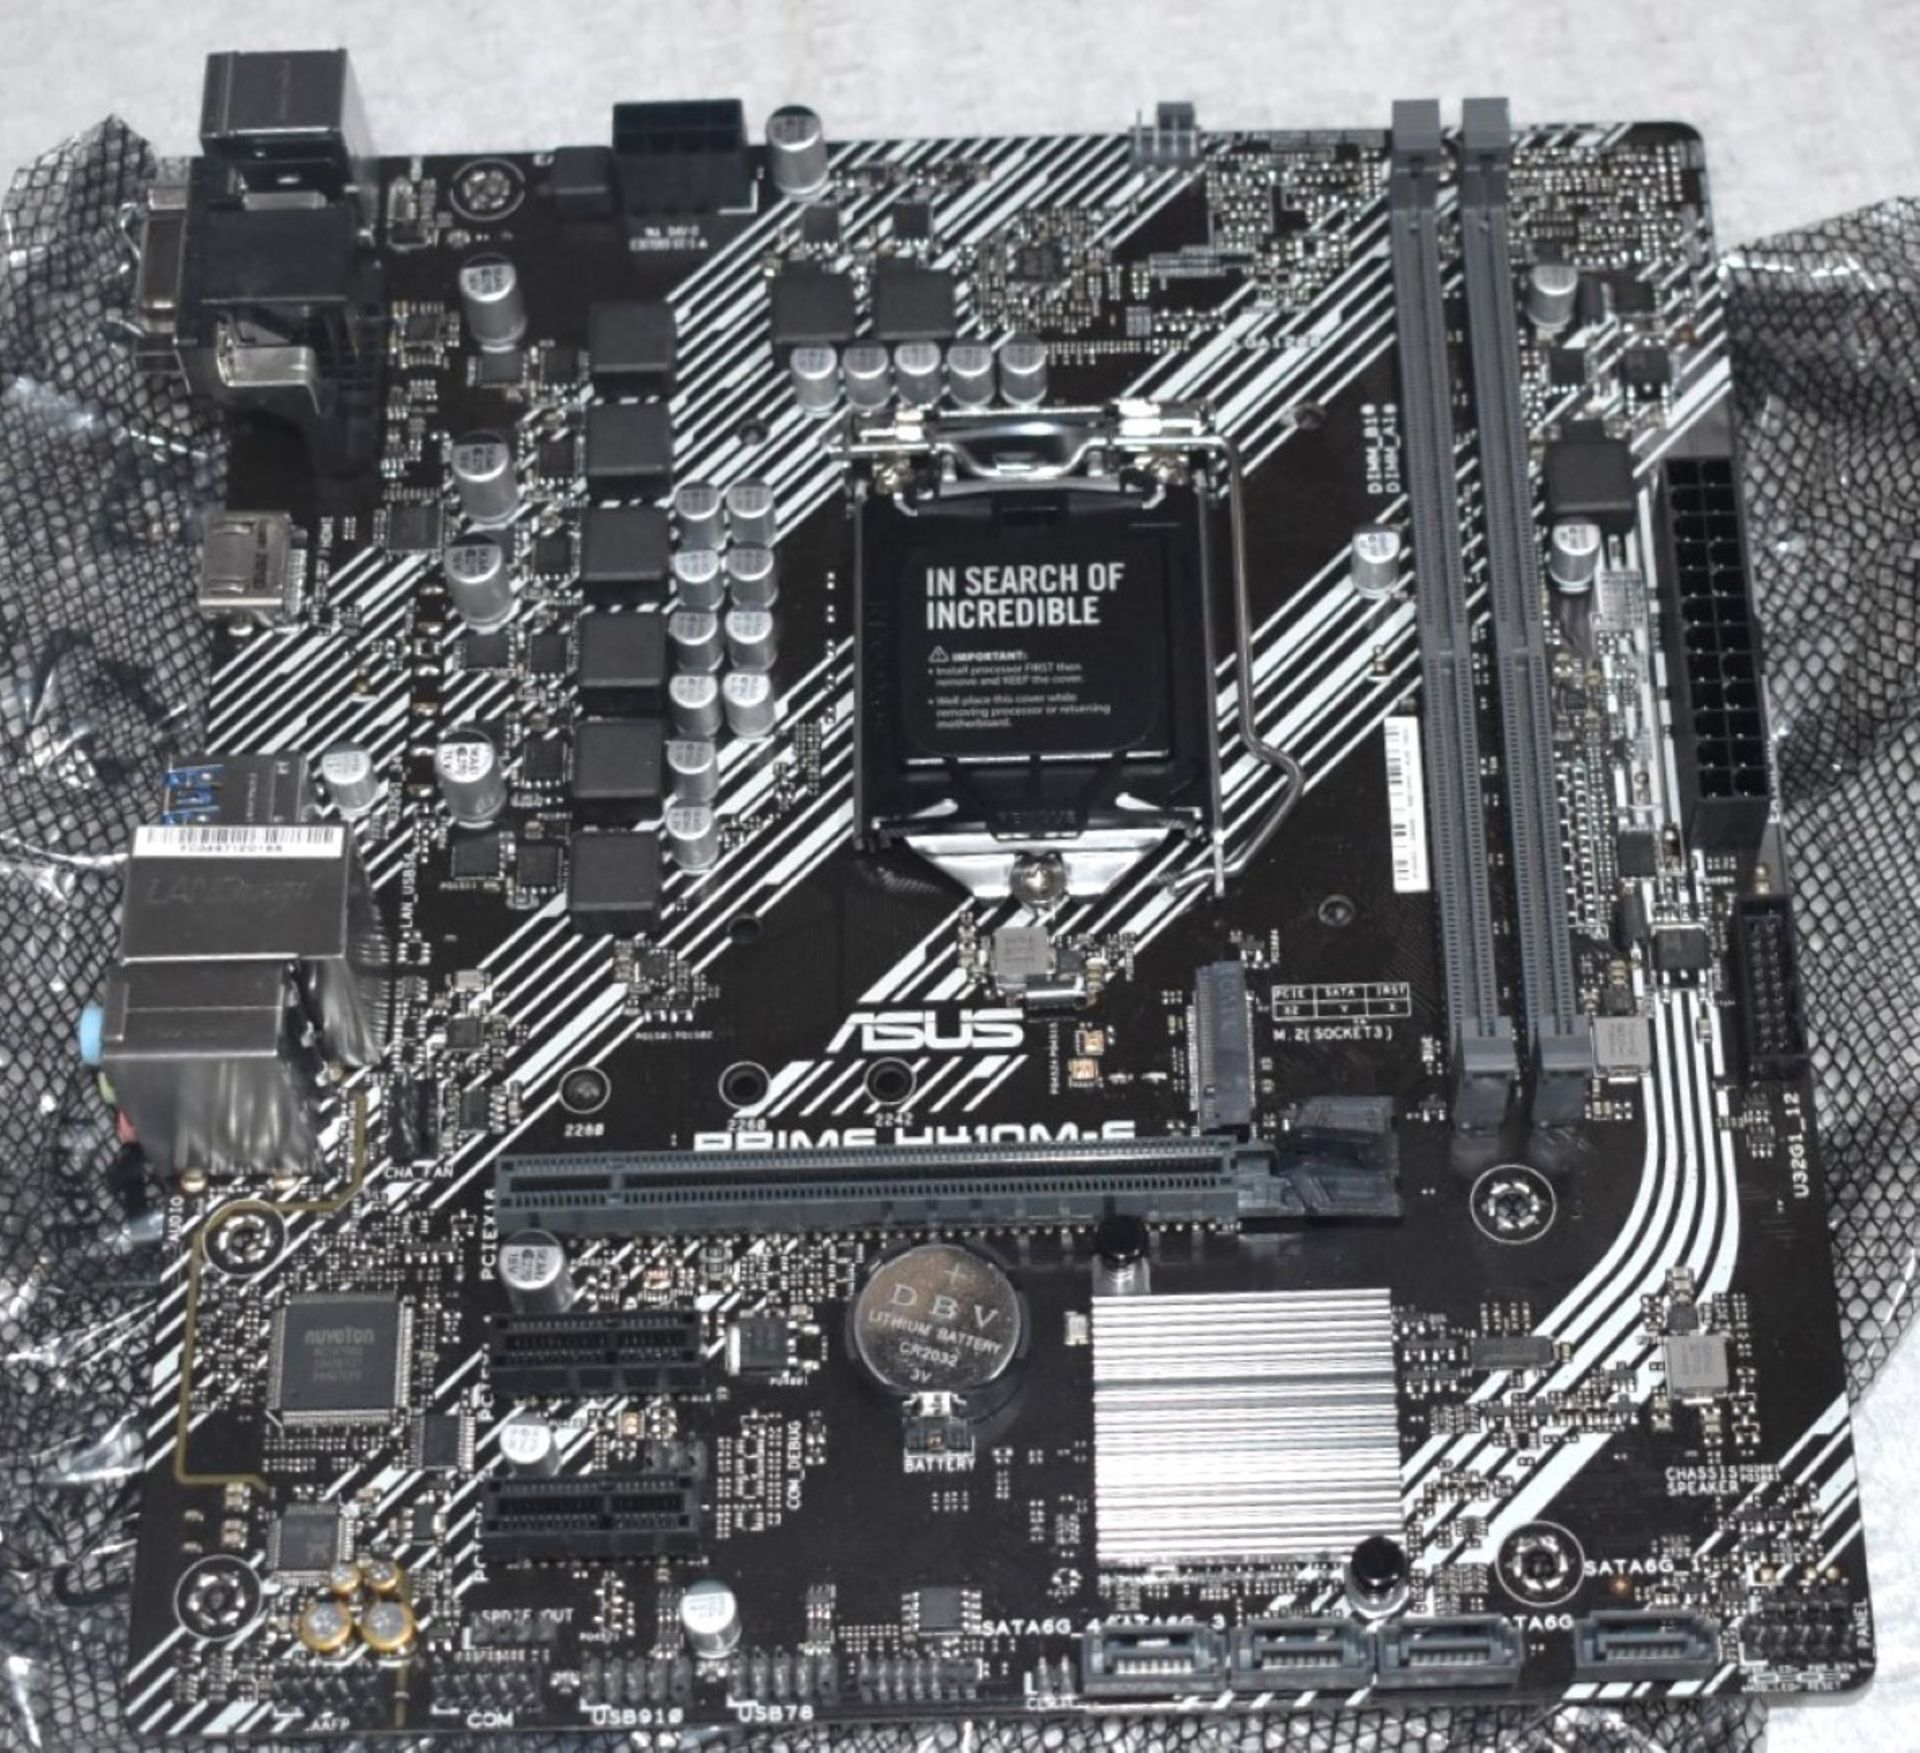 1 x Asus Prime H410M-E Intel LGA1200 Motherboard - Boxed With Accessories - Image 4 of 6